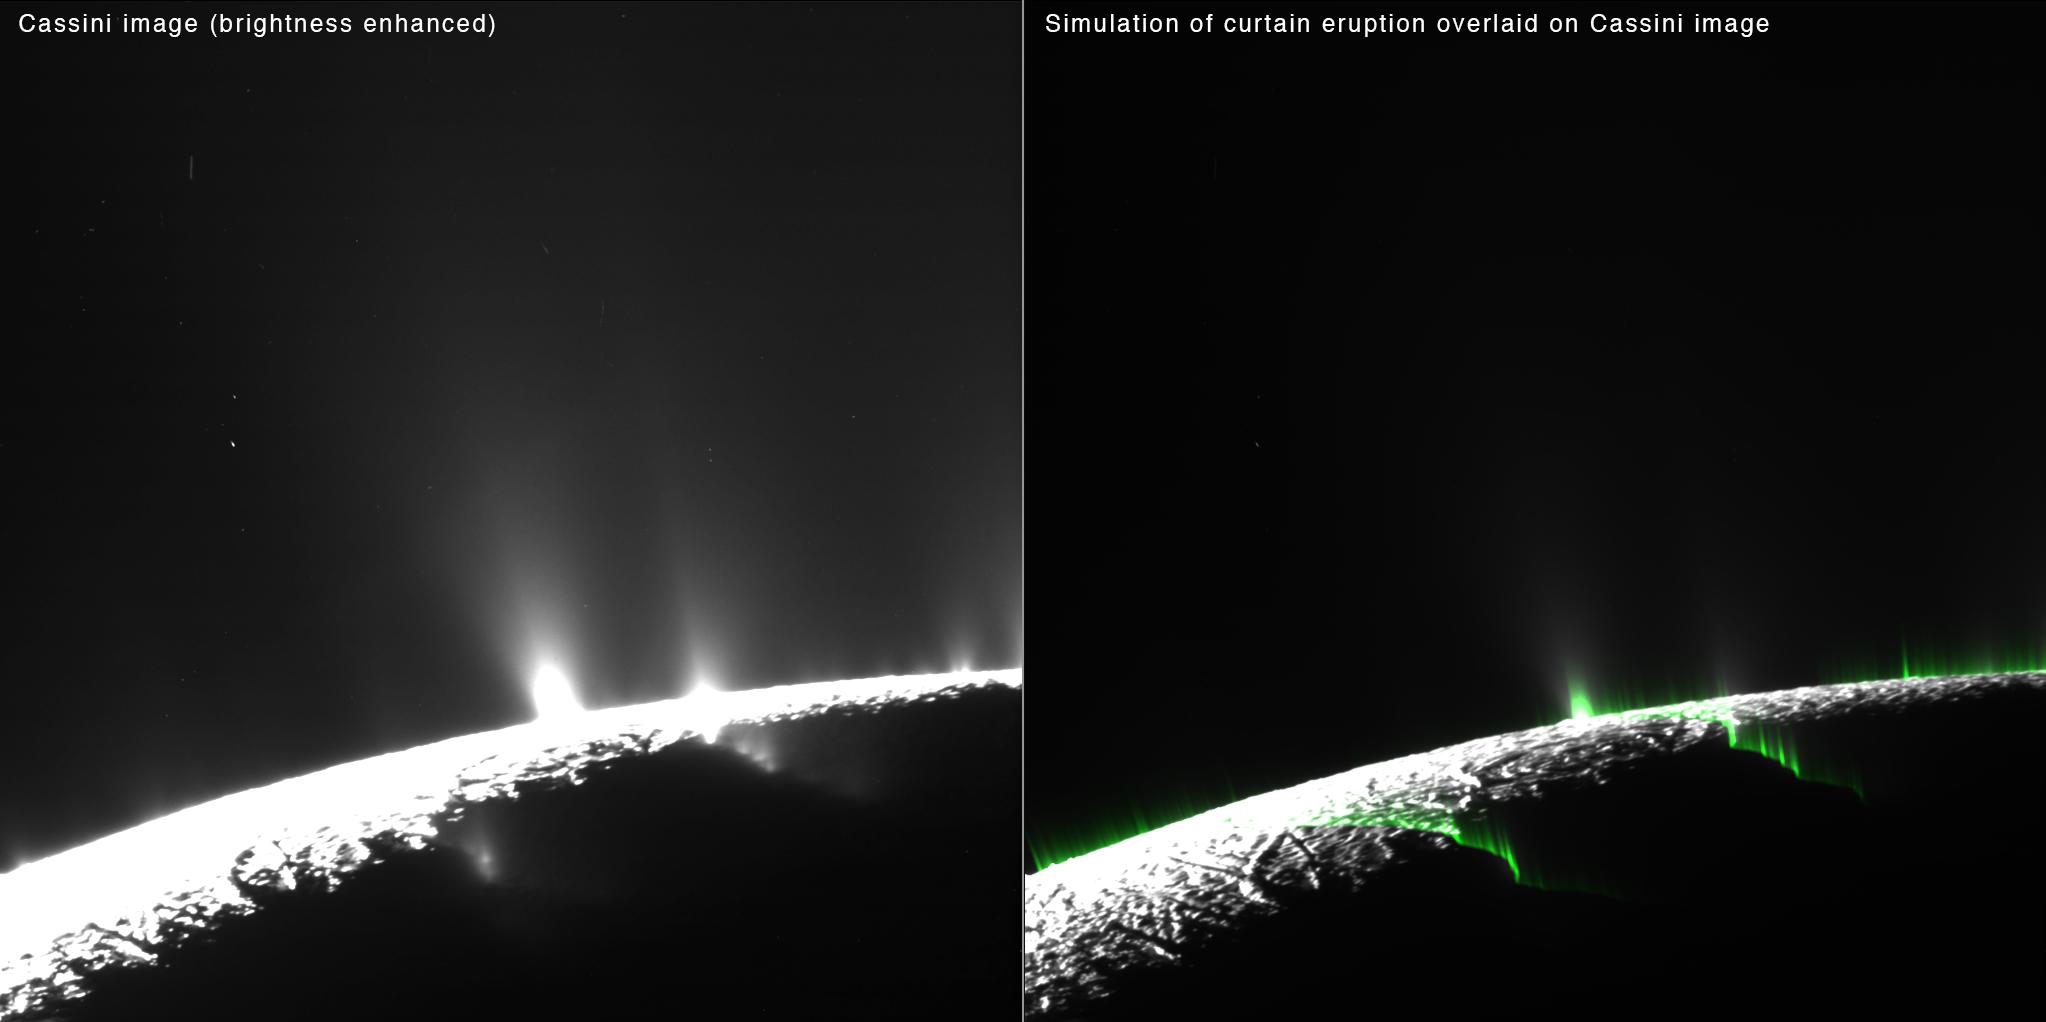 Side by side of a Cassini image of Enceladus and a simulation of curtain eruption overlaid on the same image